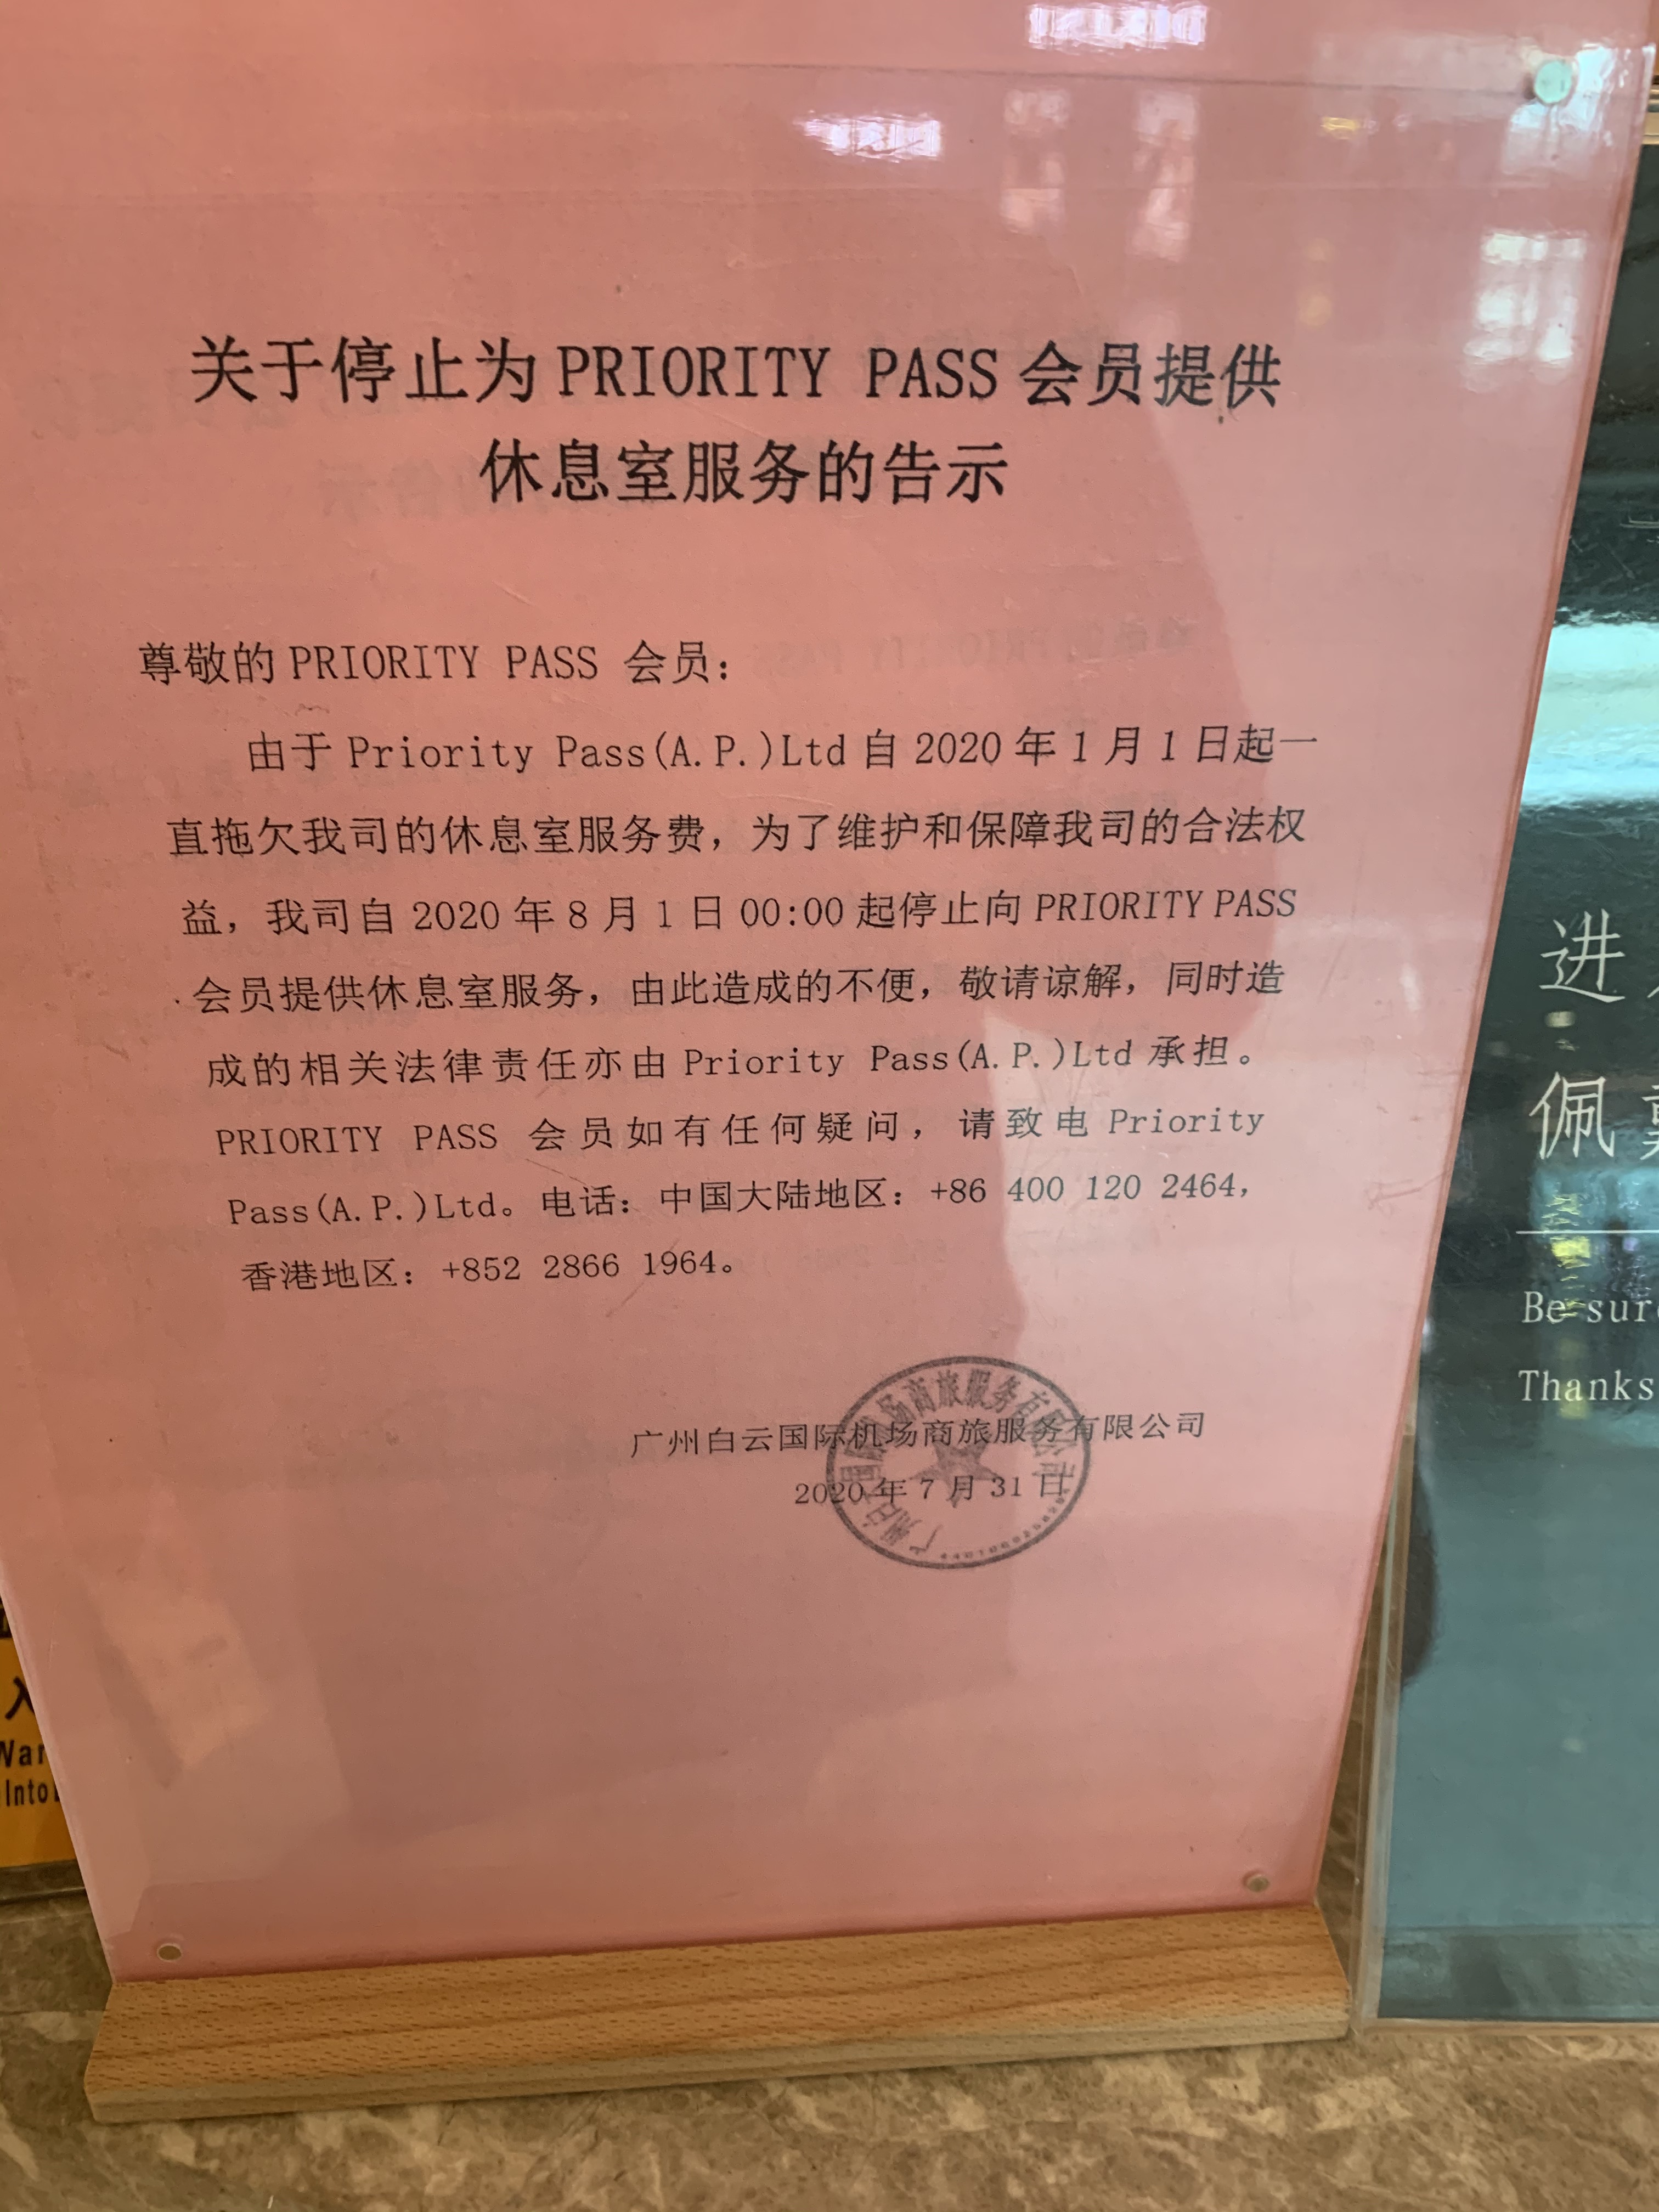 ˵priority pass CAN 8.1ͣʹ